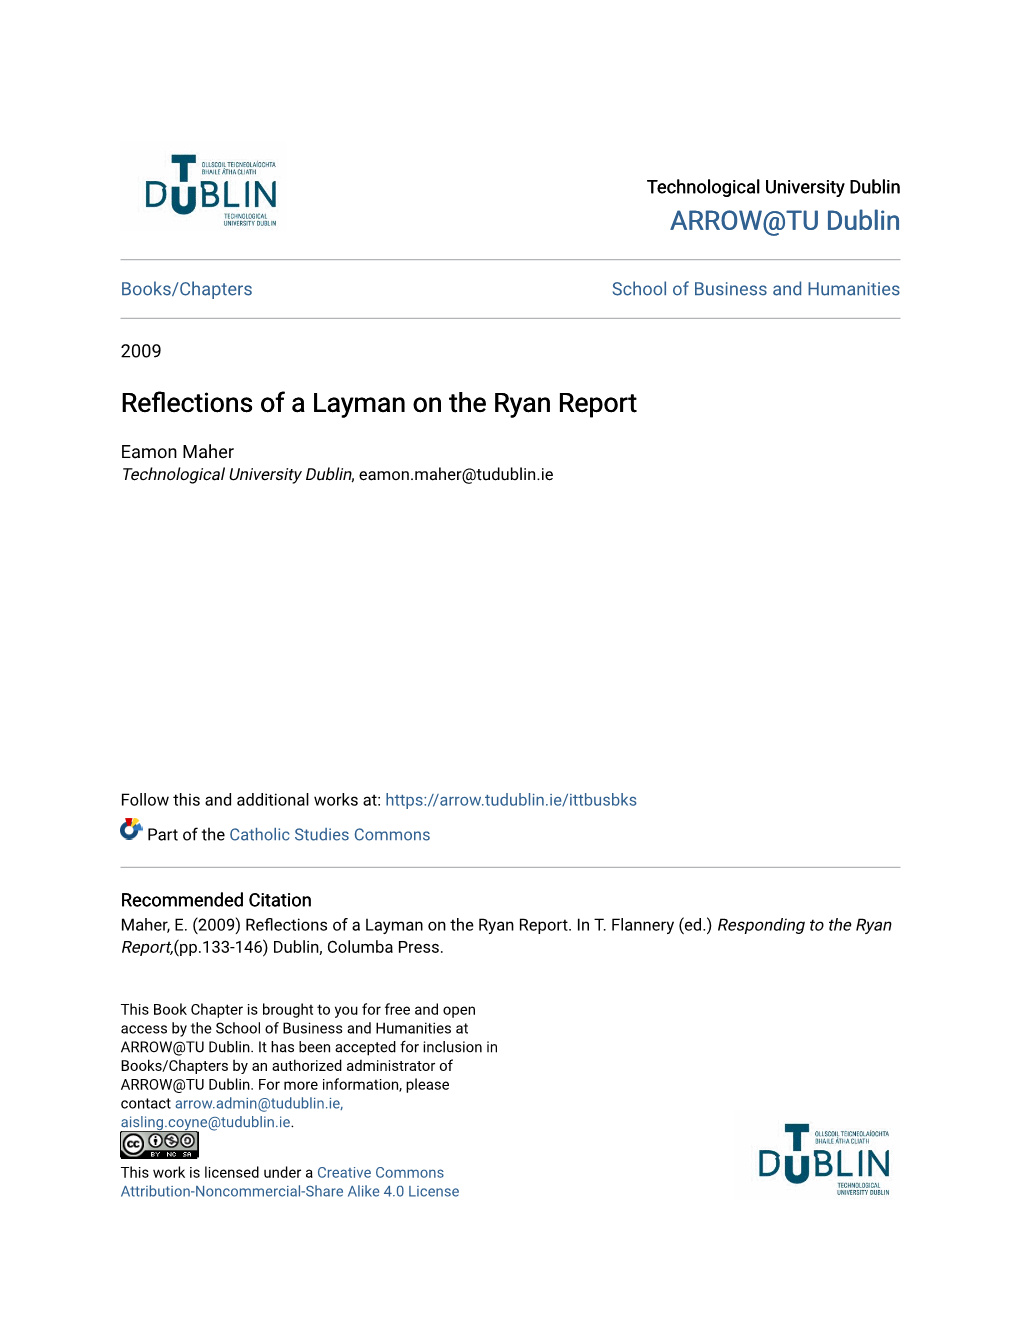 Reflections of a Layman on the Ryan Report